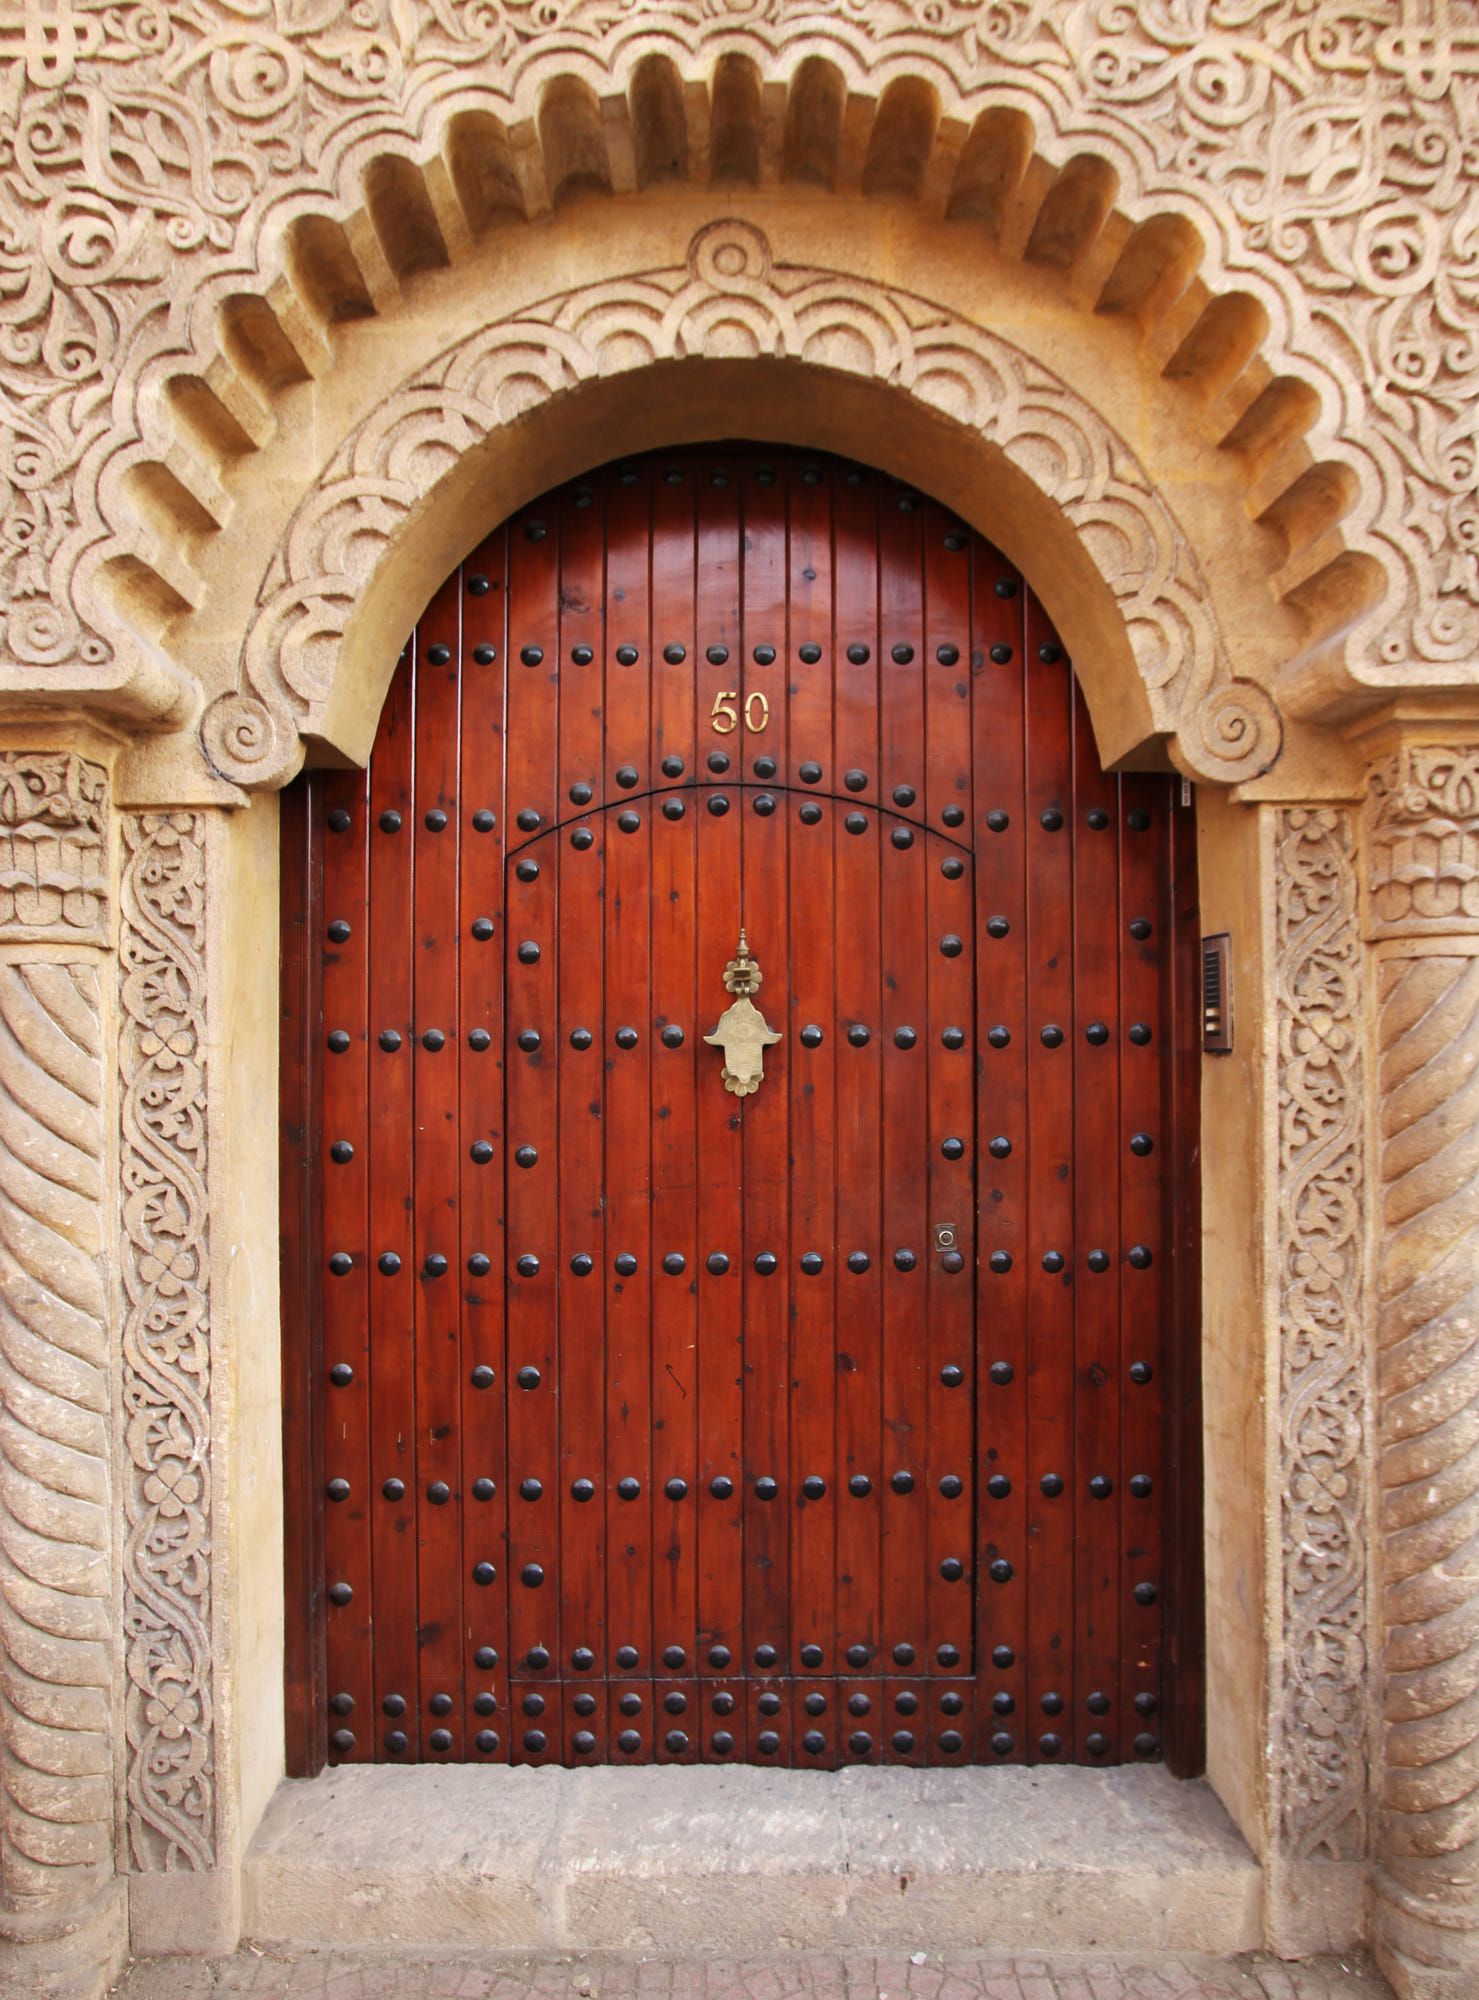 This is a door found somewhere in the Medina of Marrakech, Morocco ...